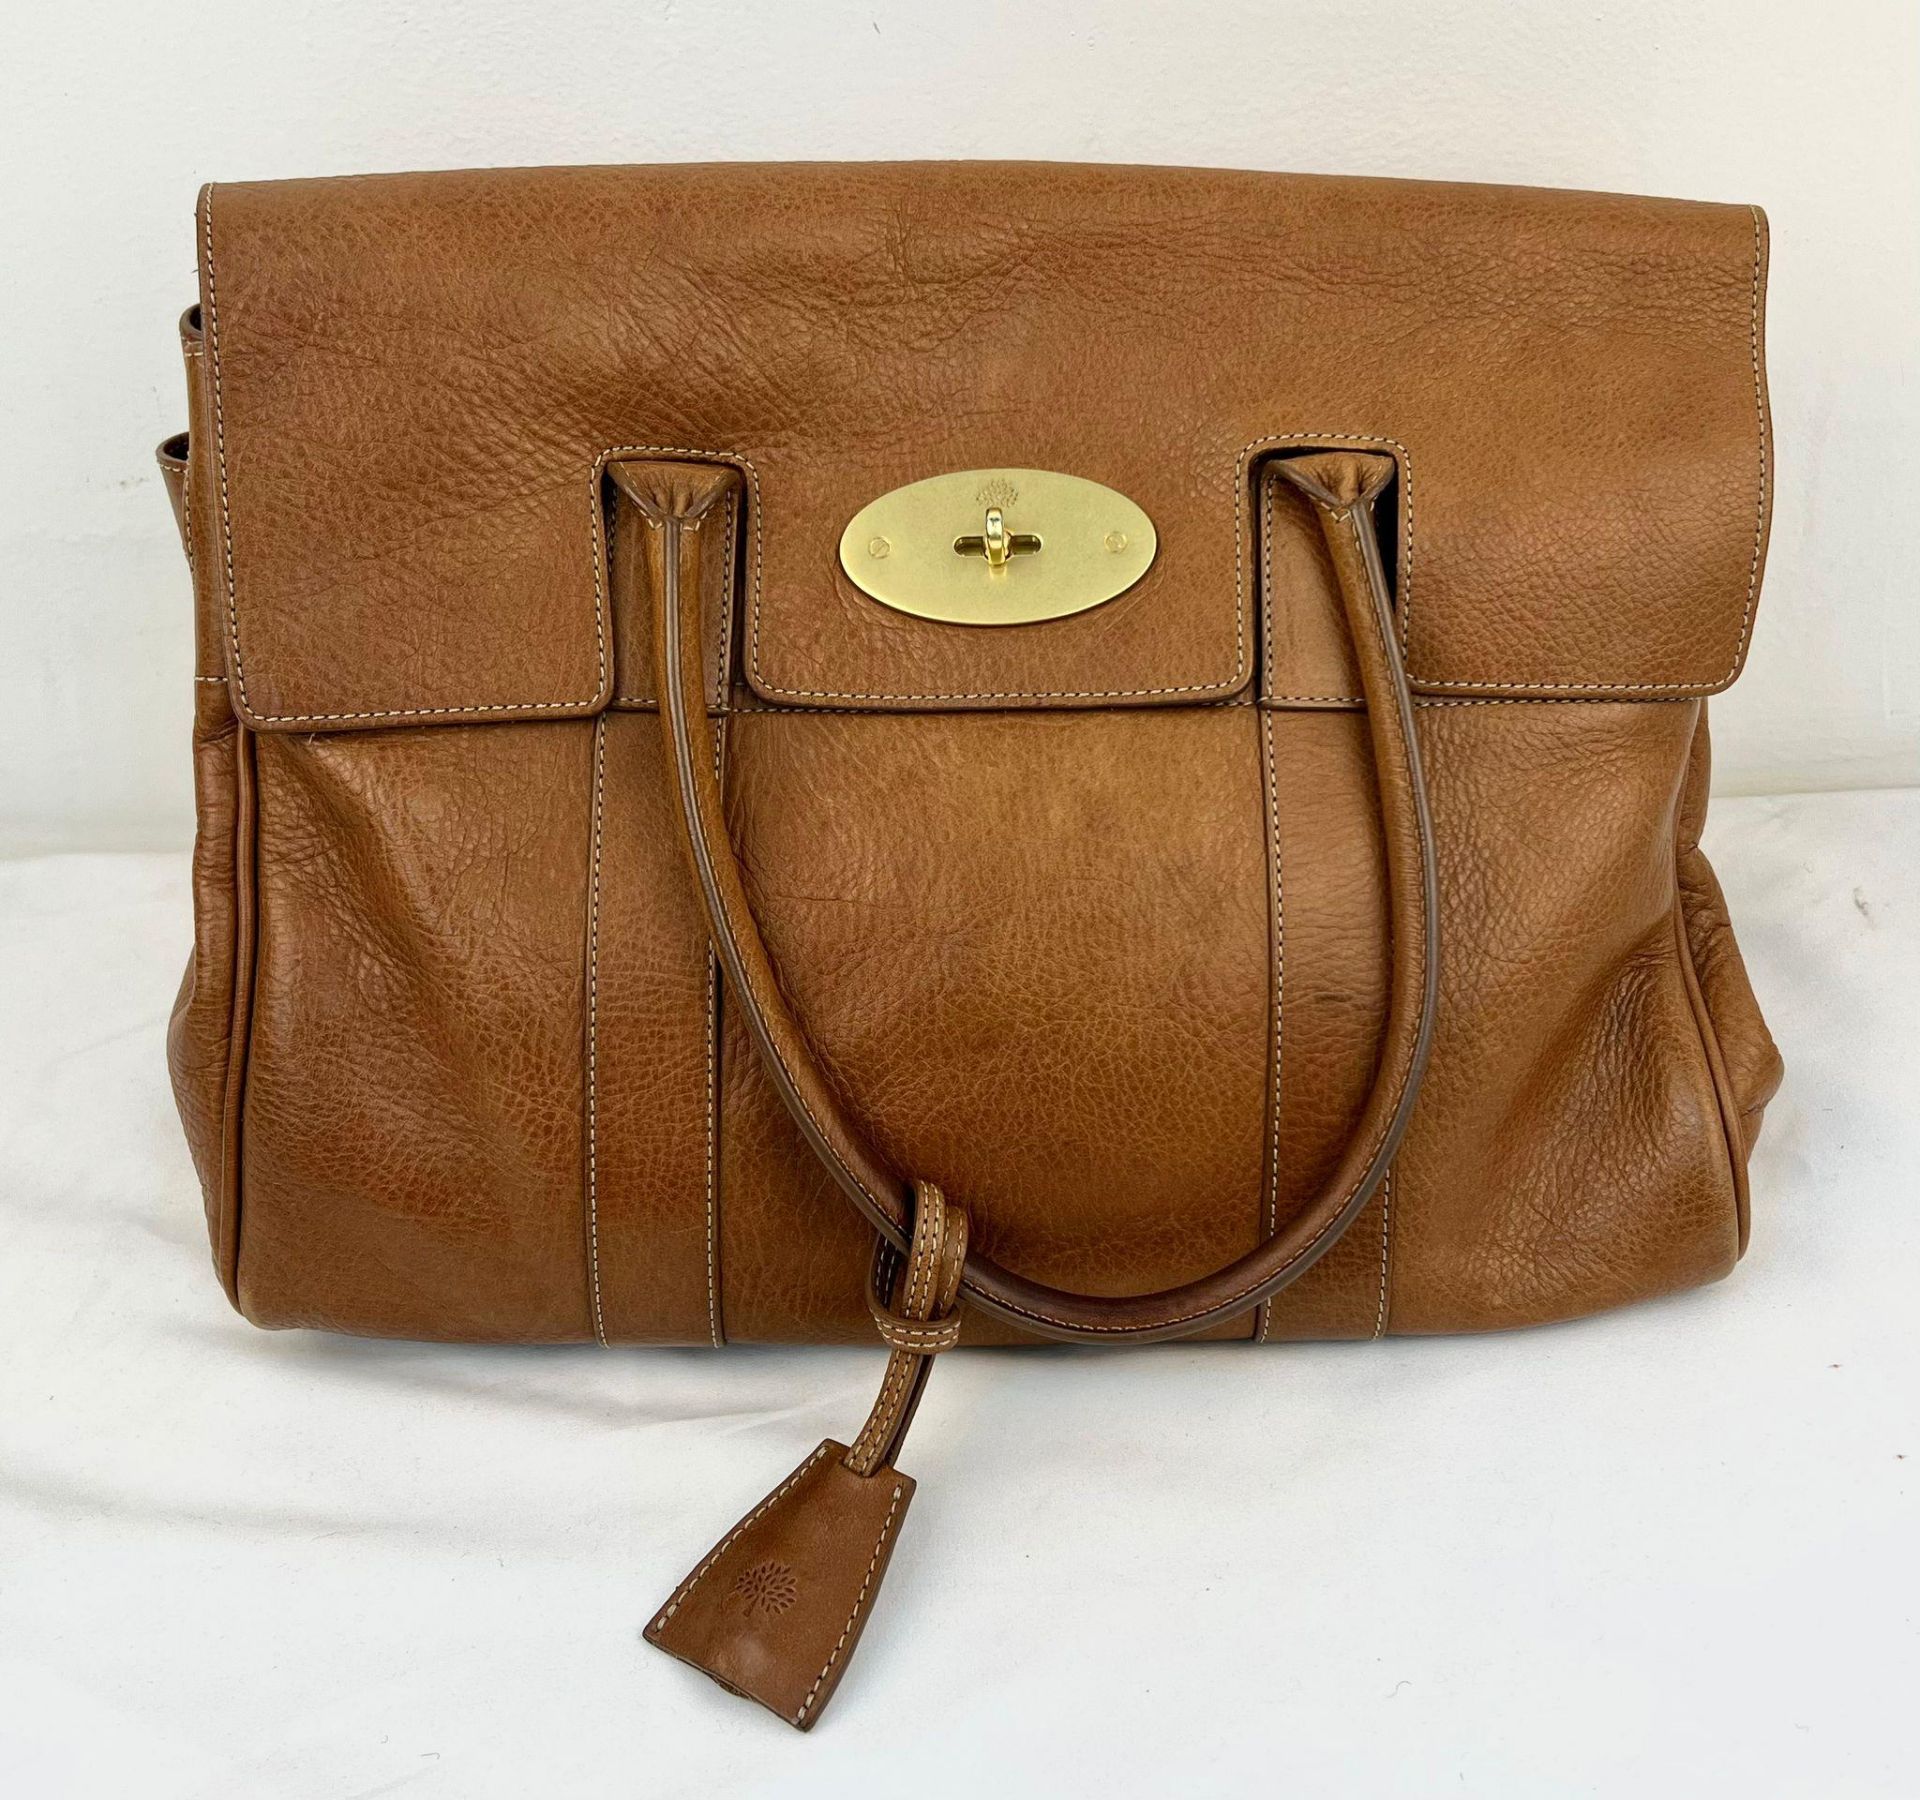 A Mulberry Classic Brown Leather Handbag. Textured brown leather. Gold-tone hardware. Spacious